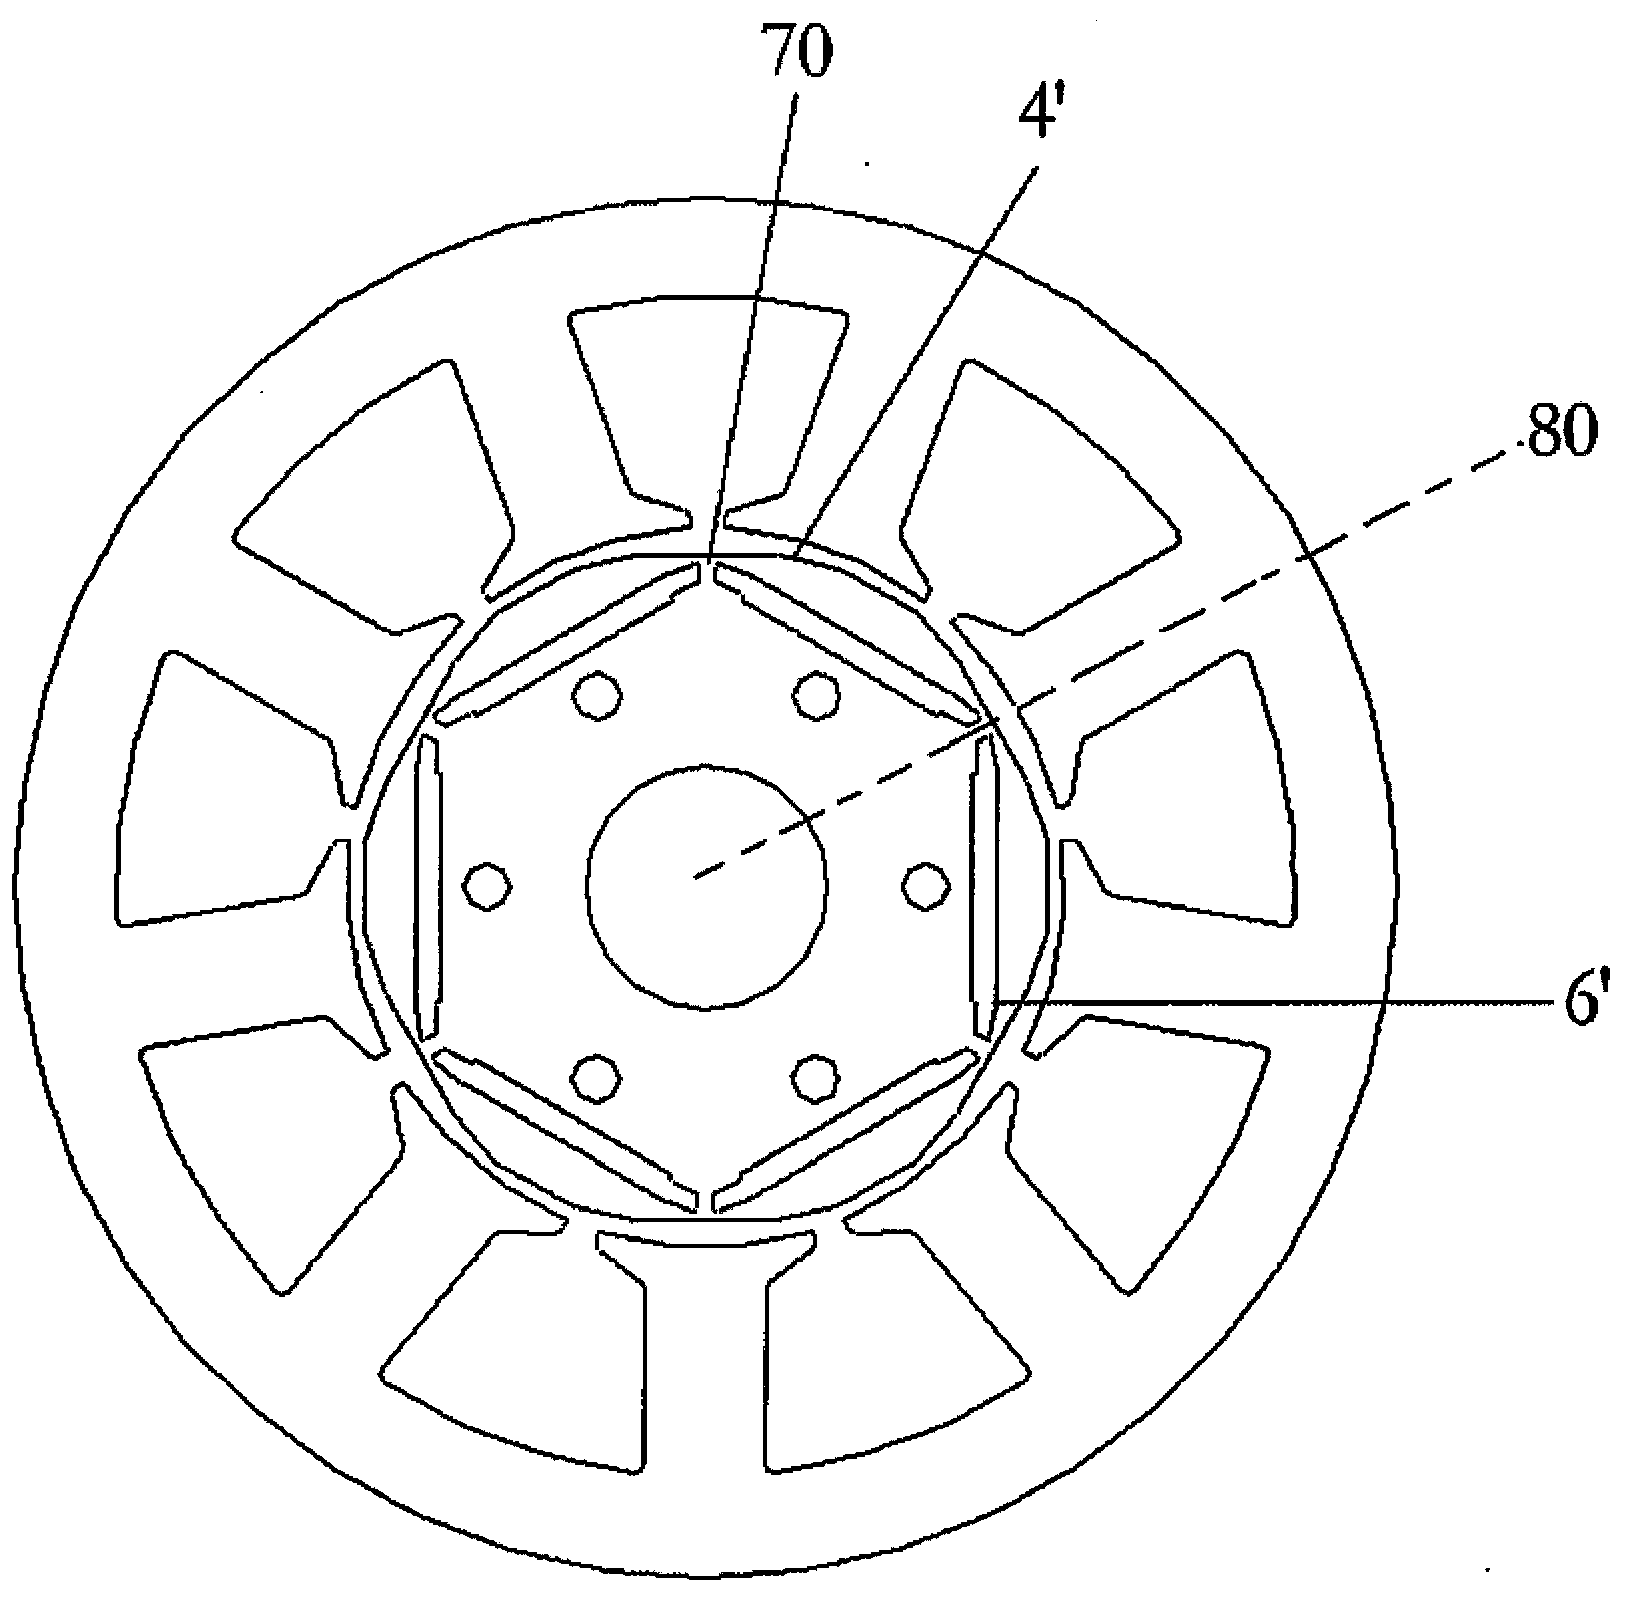 Rotor, built-in permanent magnet motor and compressor